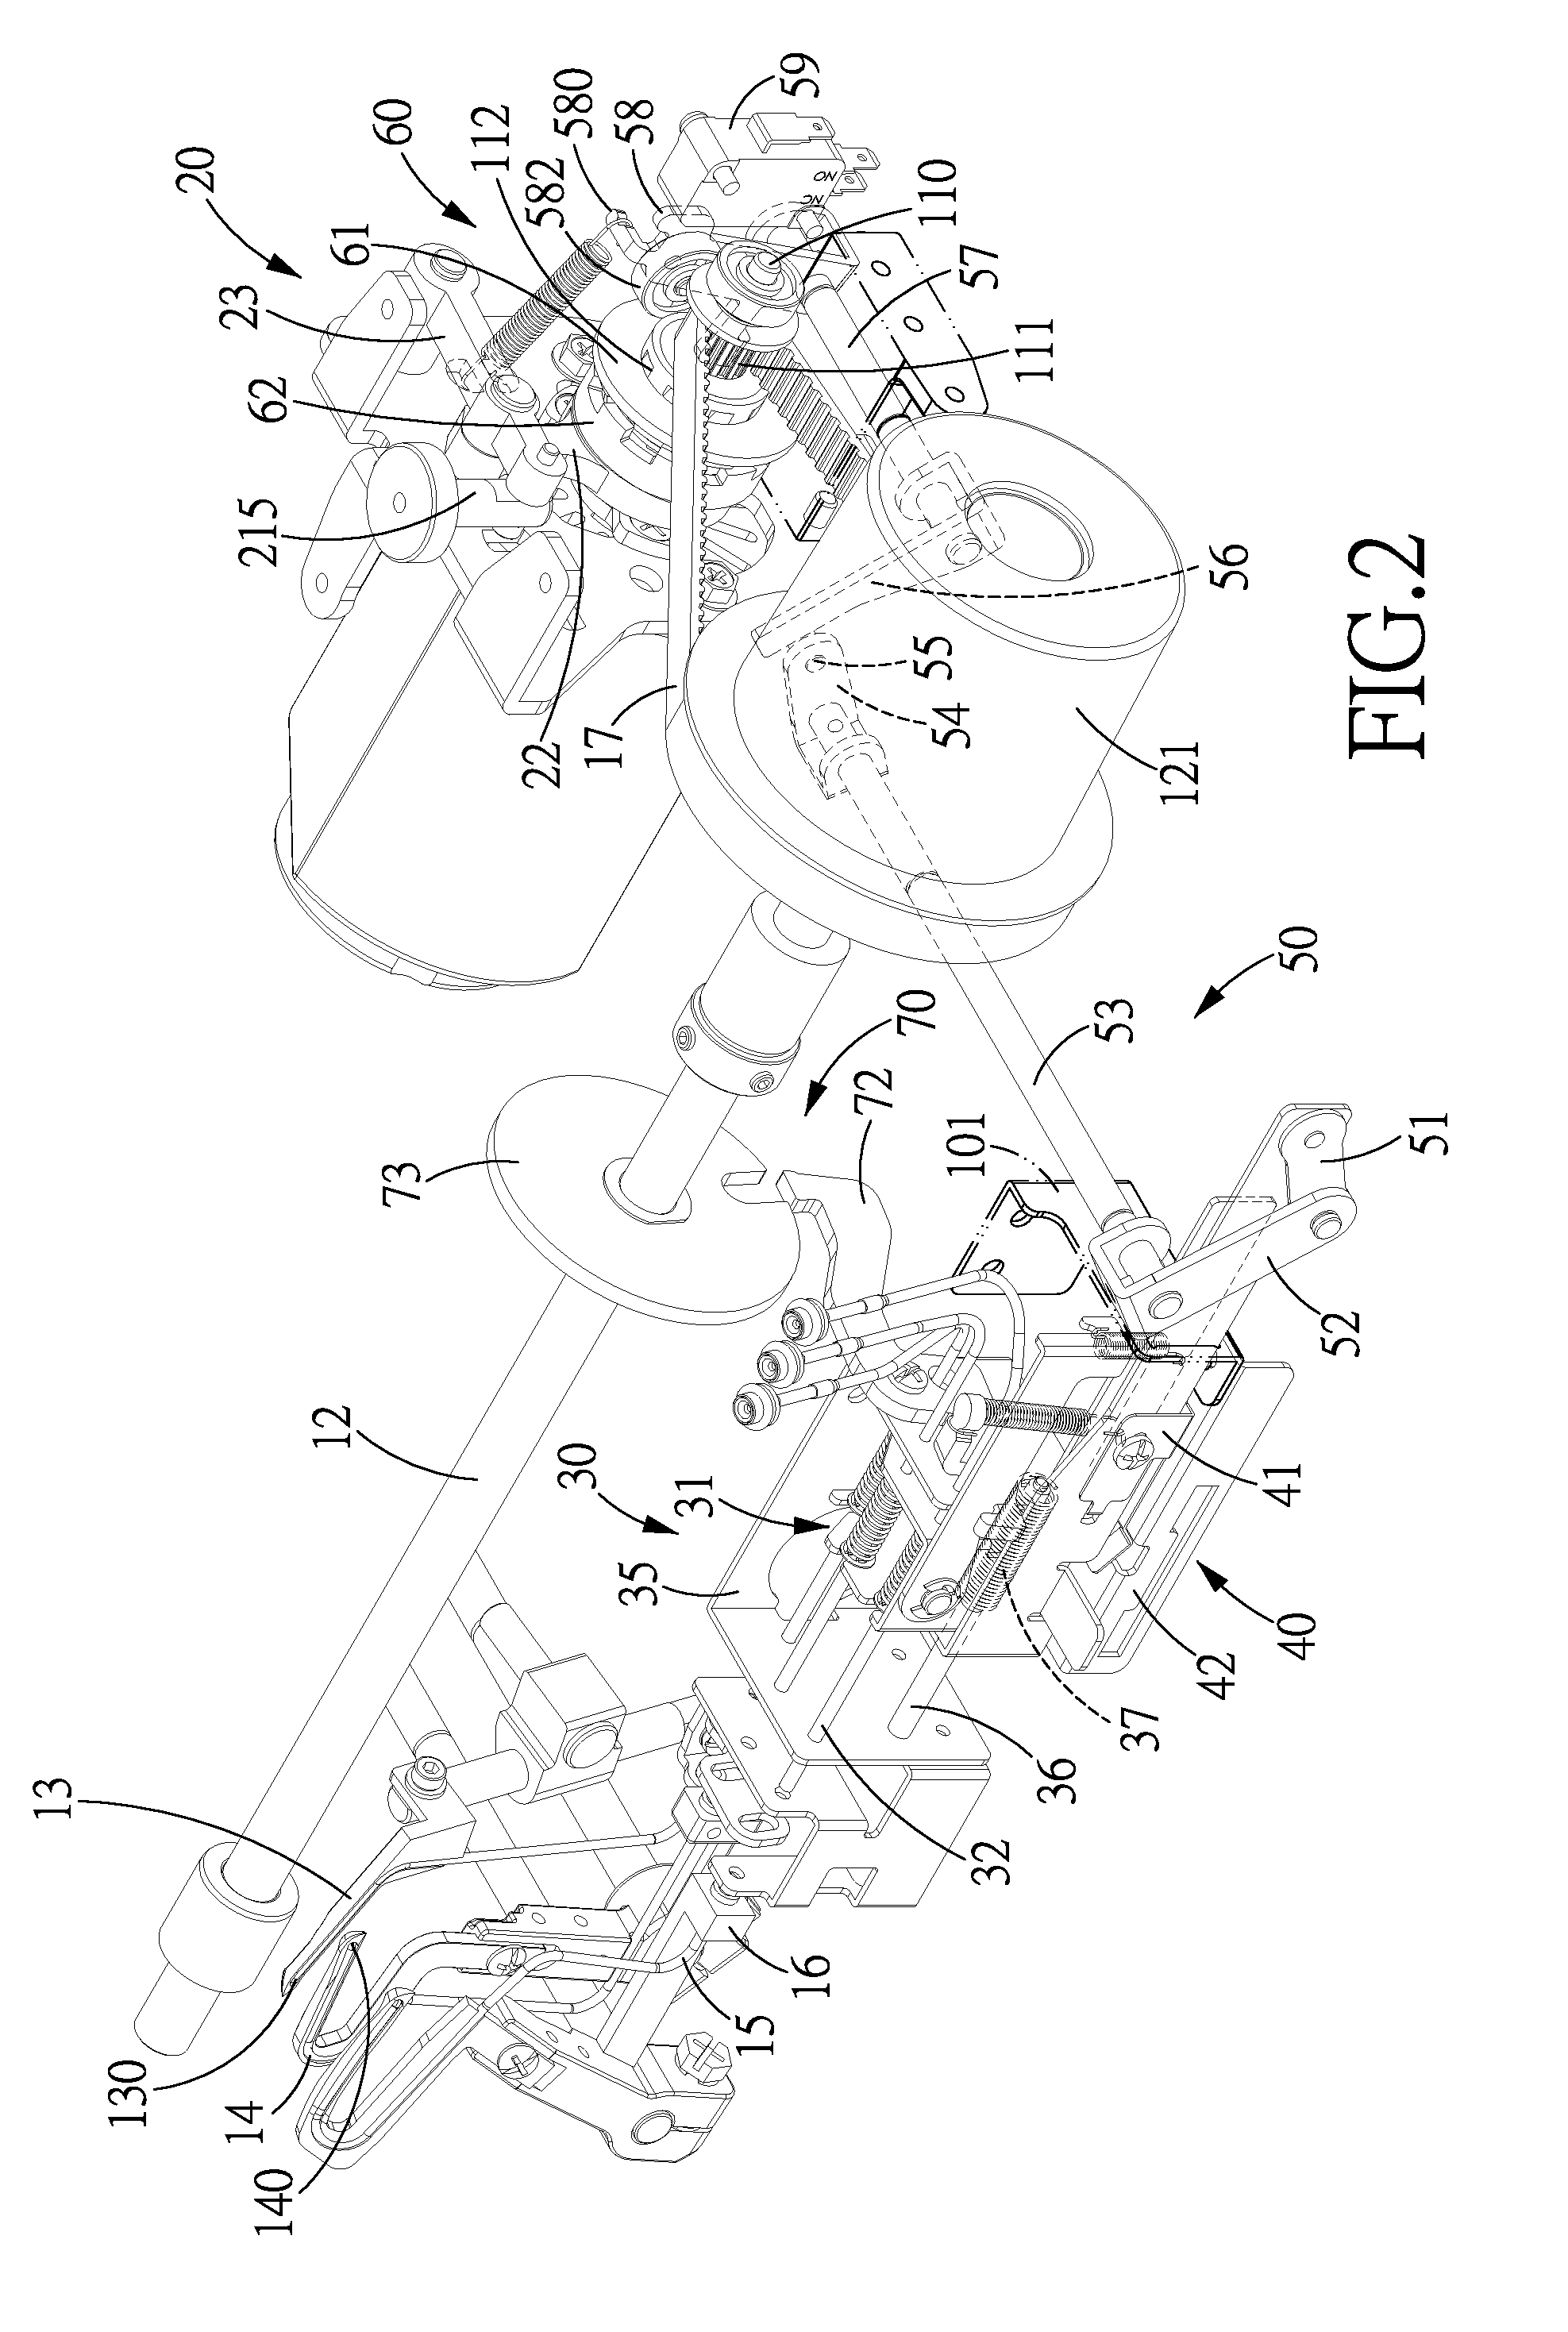 Sewing machine with a threading and air supply selecting device